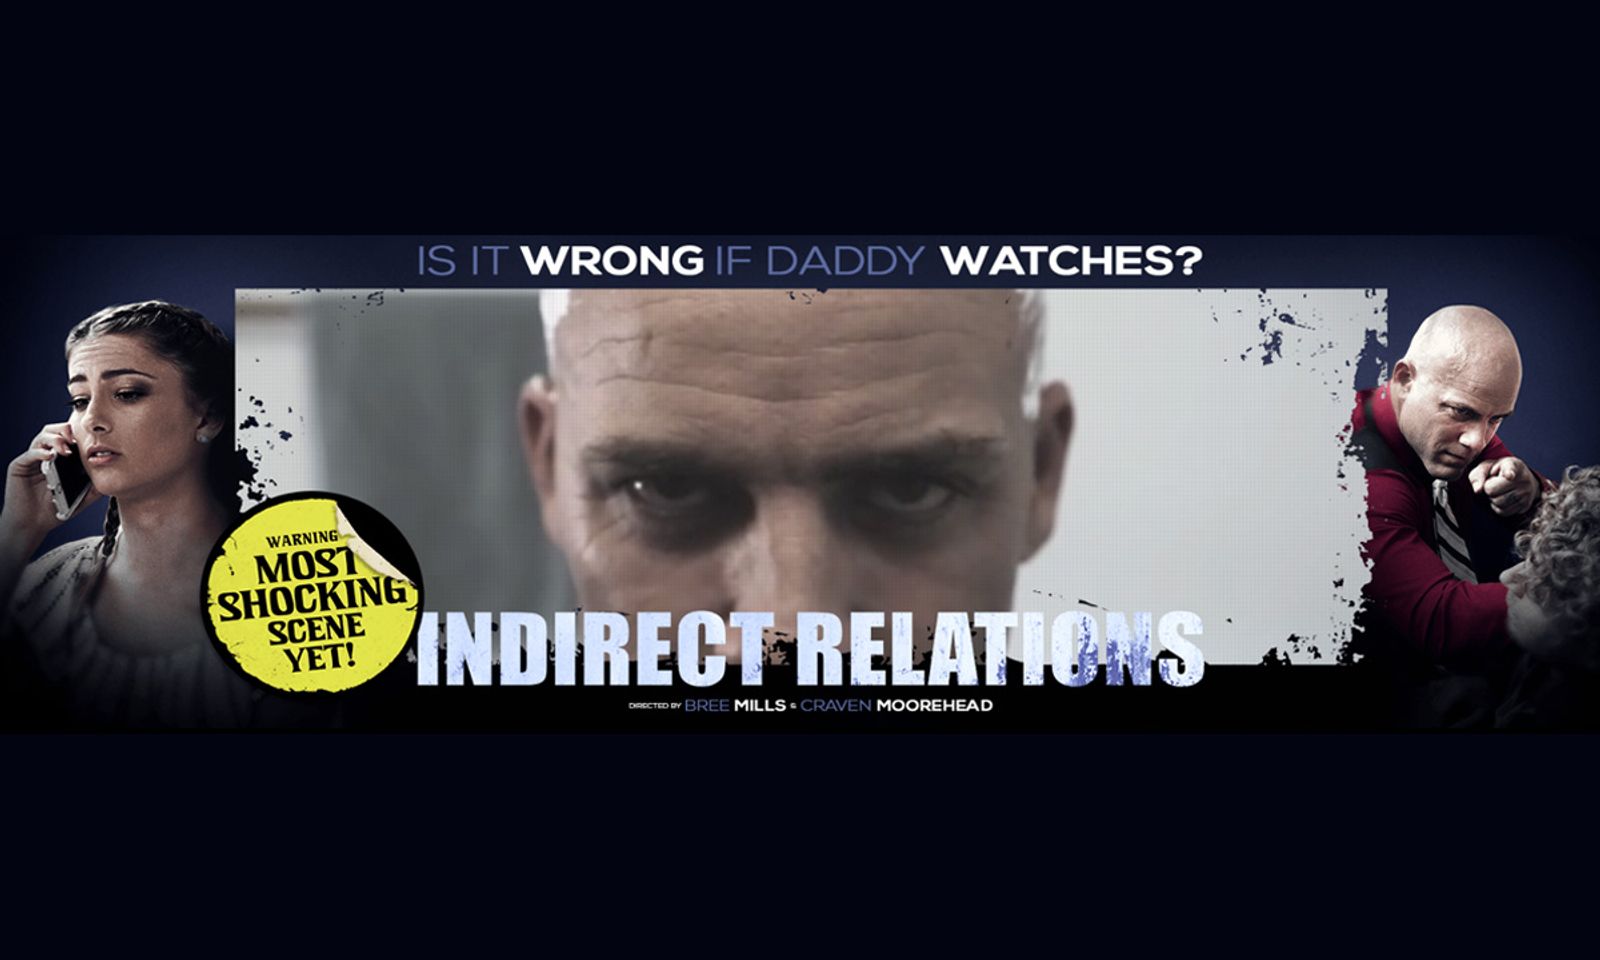 PrettyDirty.com Pushes Taboo Envelope With 'Indirect Relations'